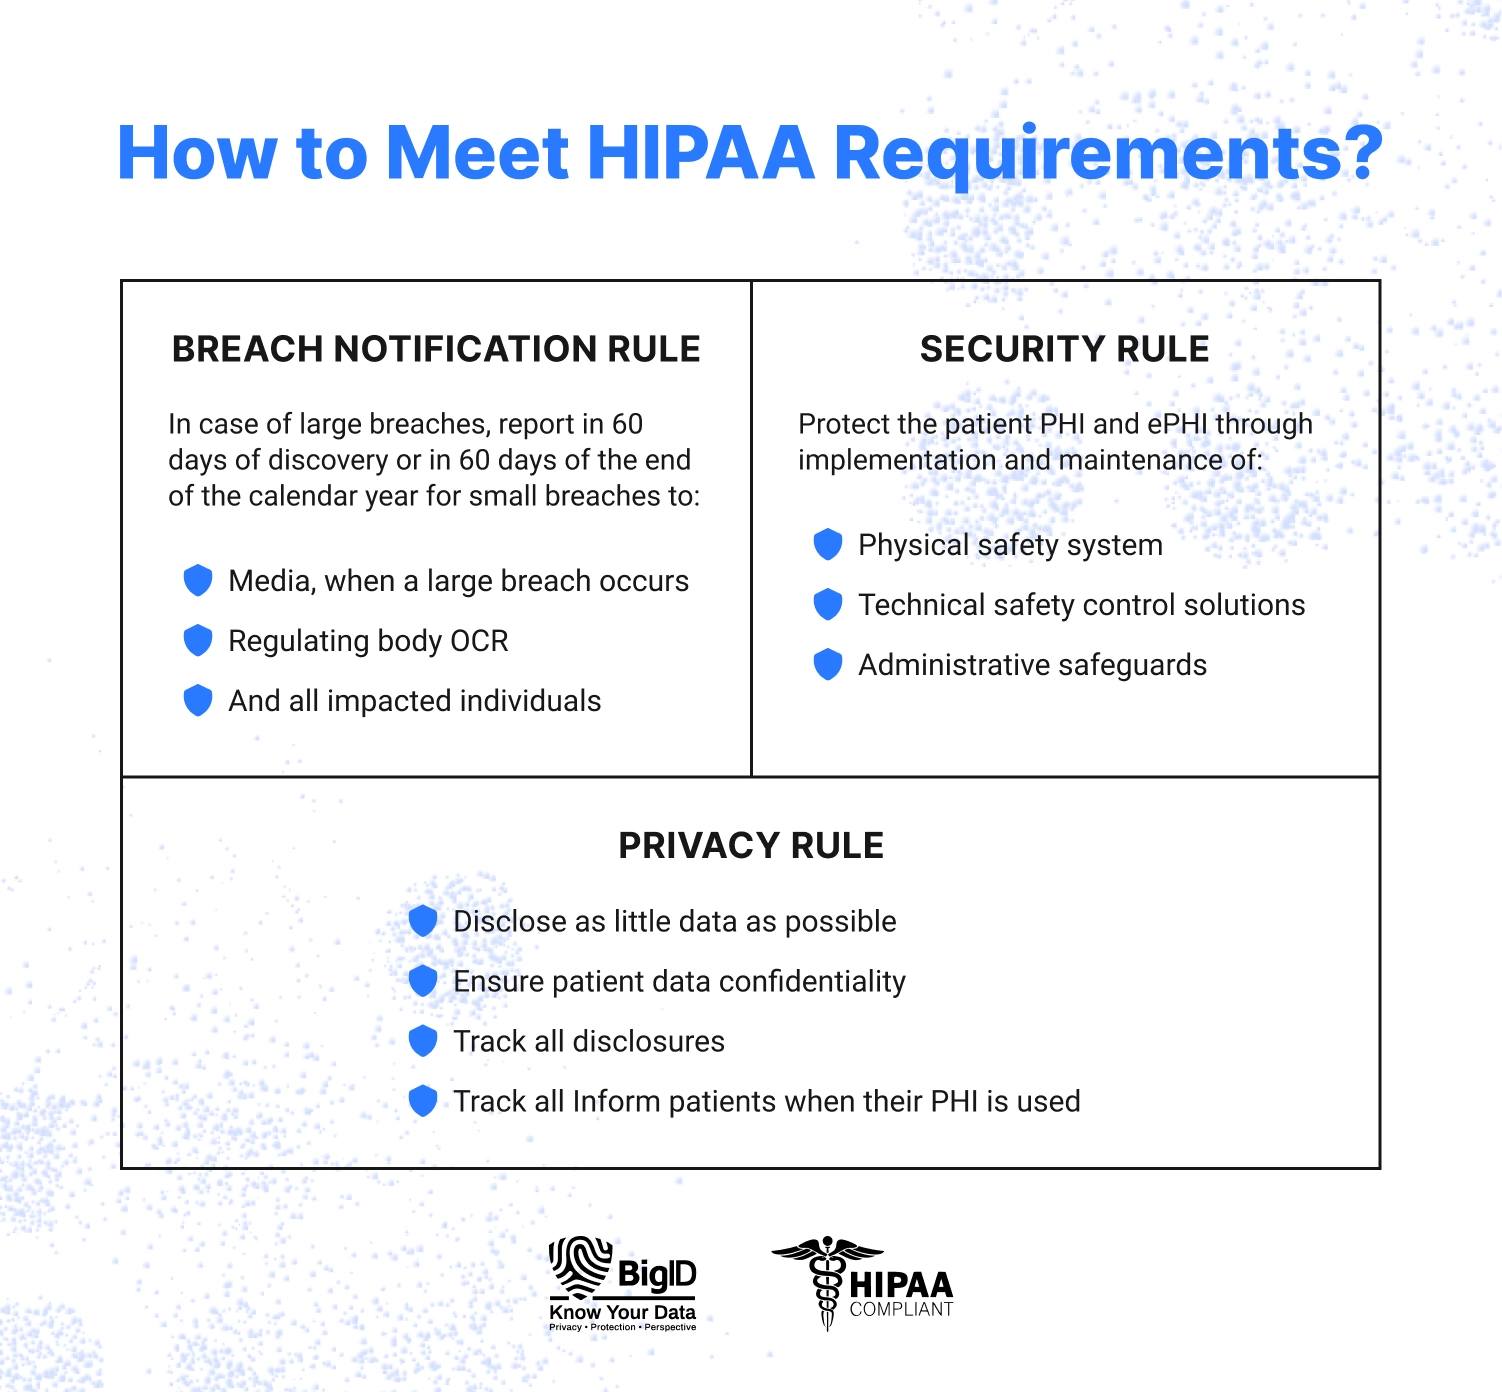 Digital transformation in healthcare: HIPAA requirements